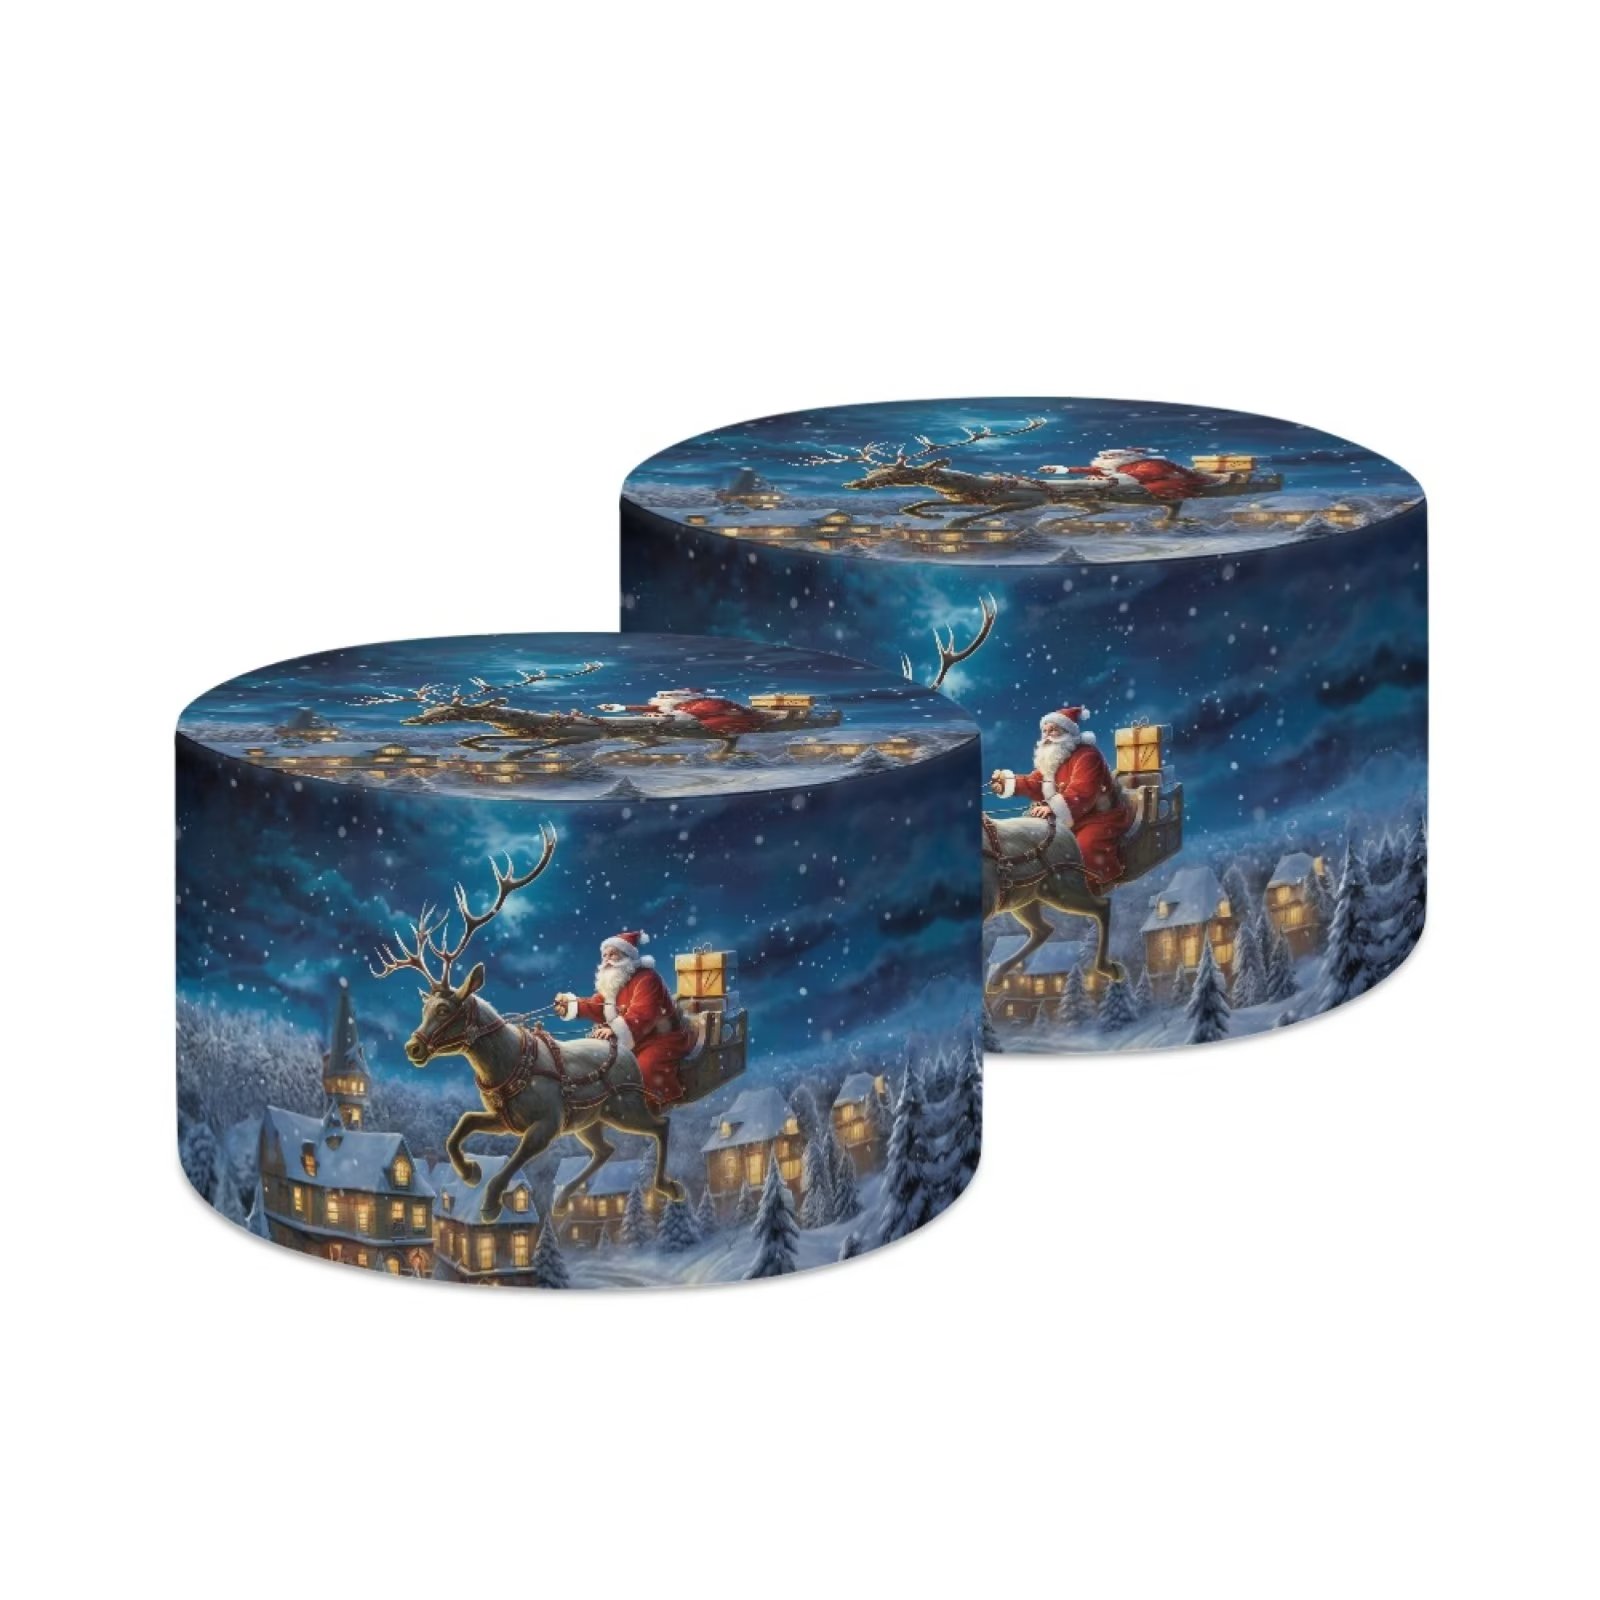 Pzuqiu Merry Christmas Lamp Shades Large Floors Lamp Cover Round Lampshade Santa Claus Reindeer Kids Study Room Decor UNO Fitting One Size Lamp Covers Set of 2 - image 1 of 8